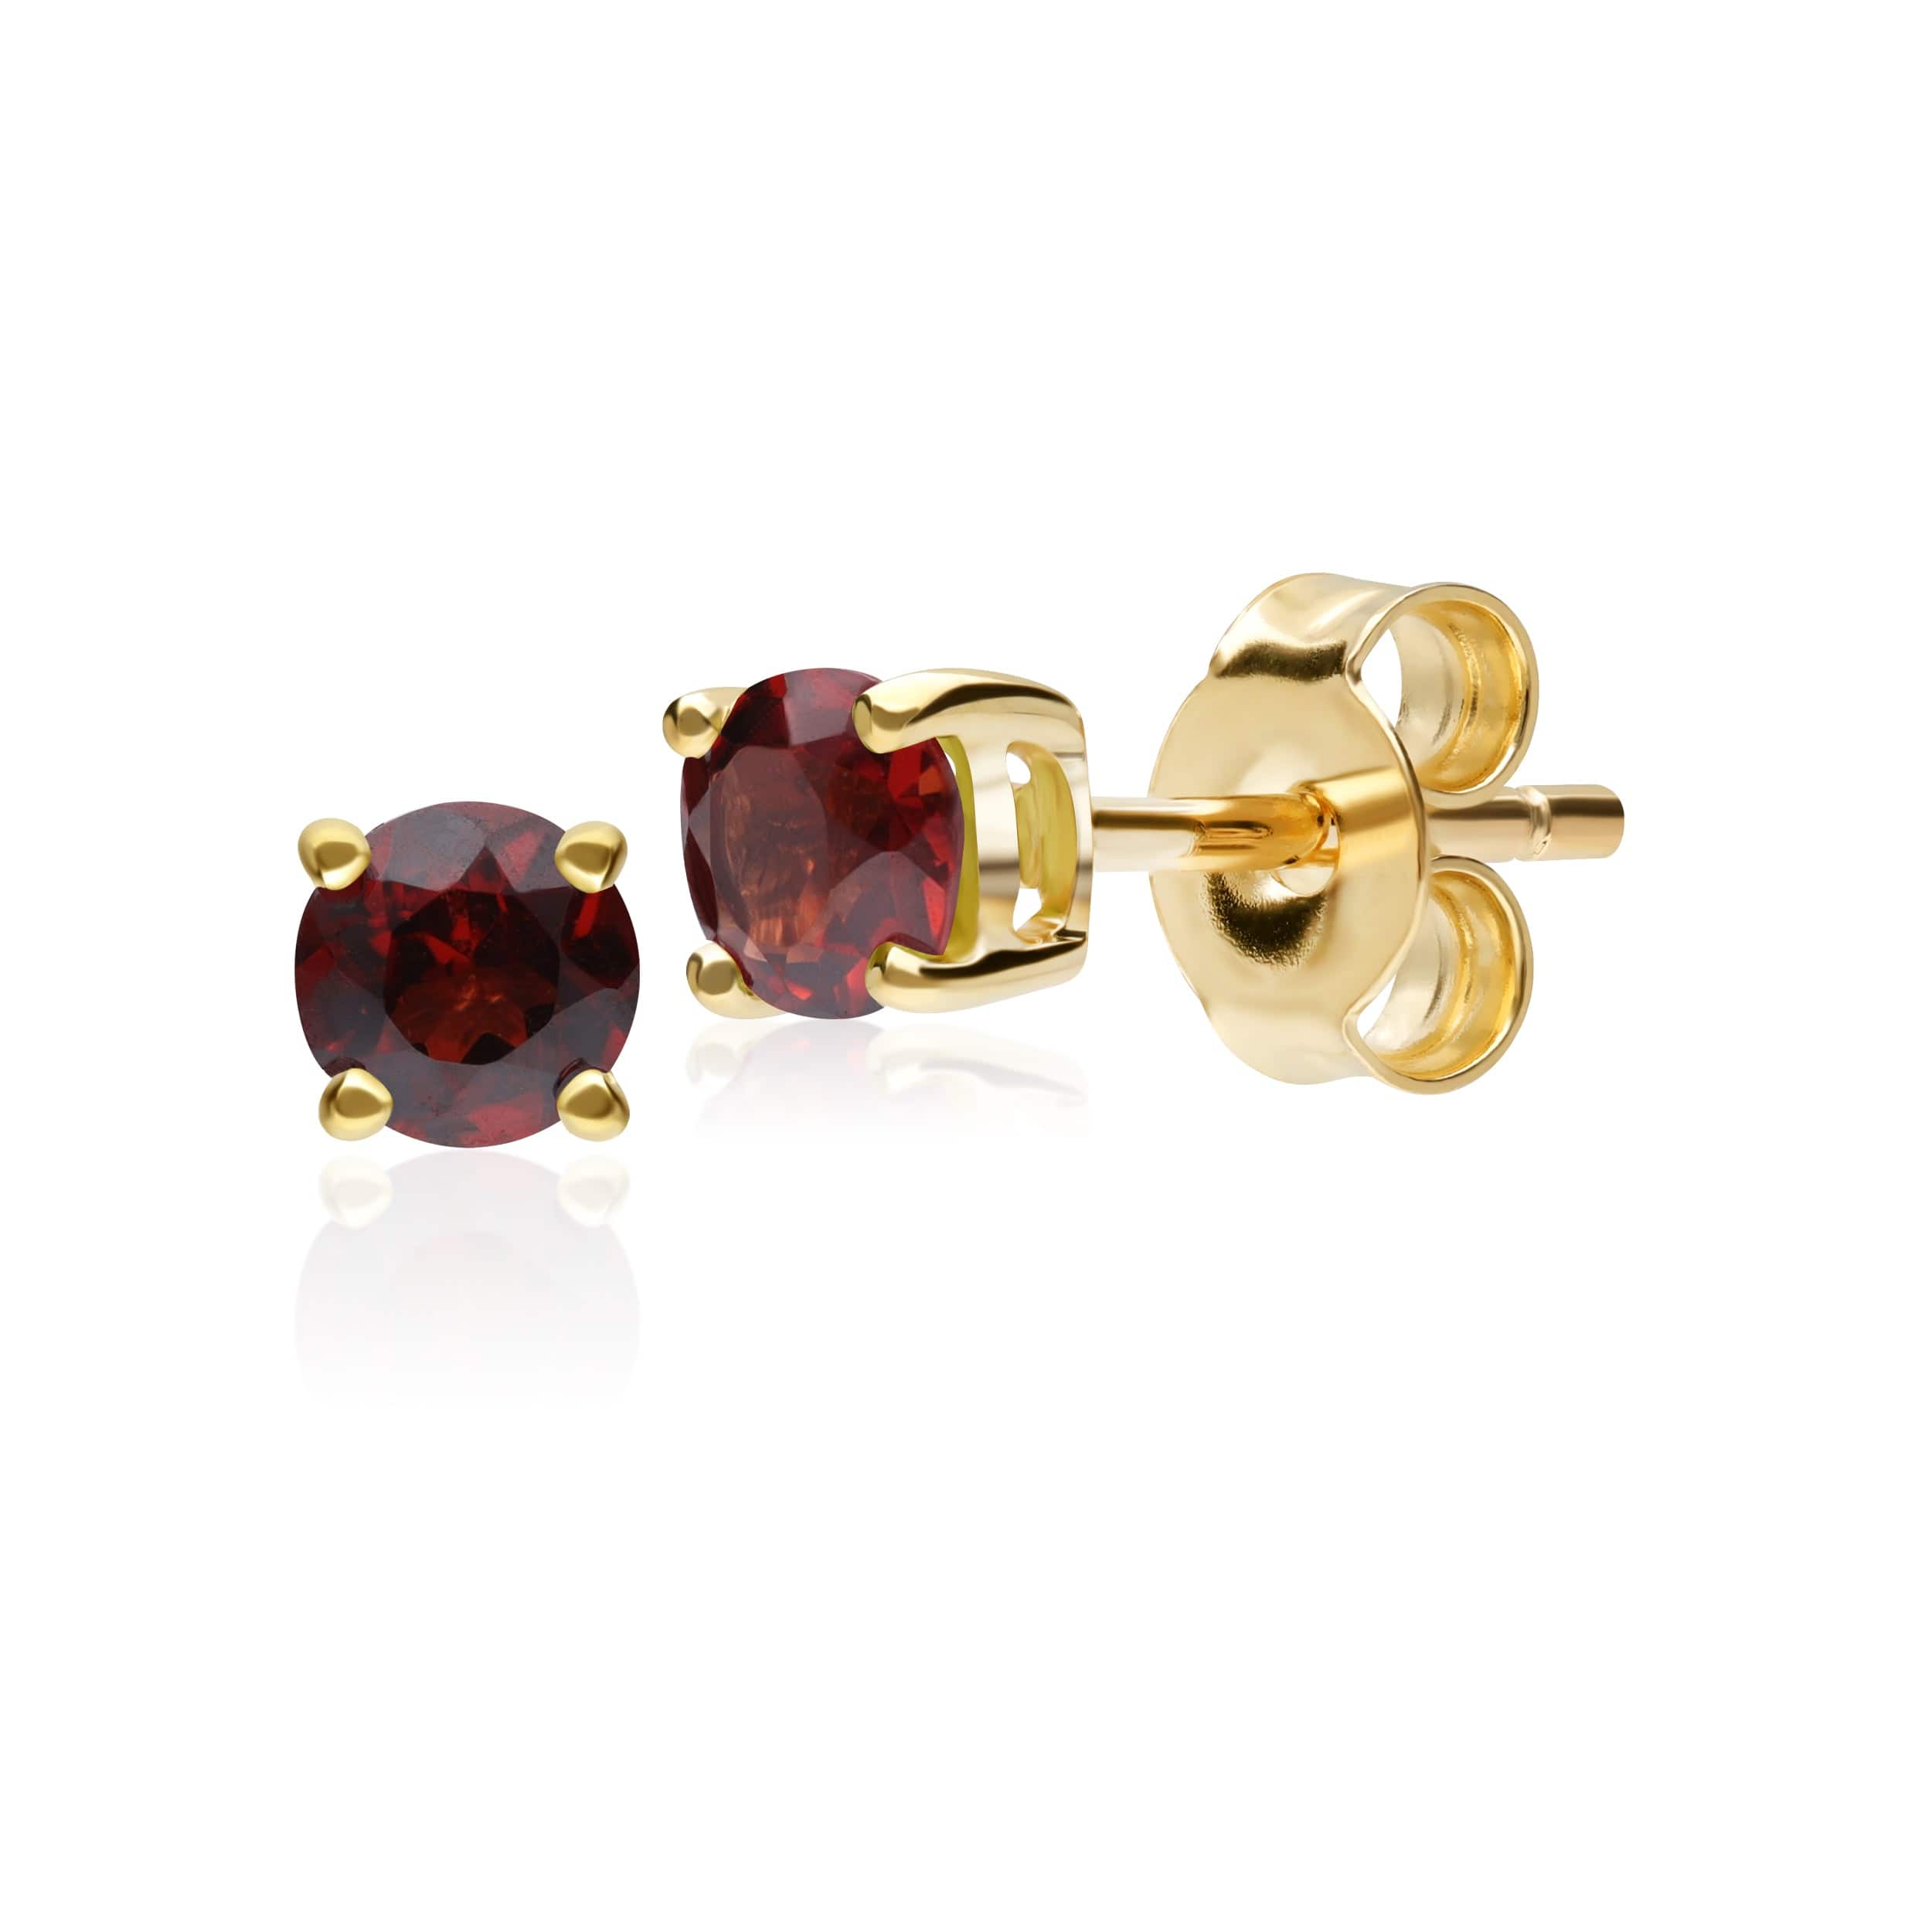 11568 Classic Round Garnet Stud Earrings in 9ct Yellow Gold 3.5mm 1